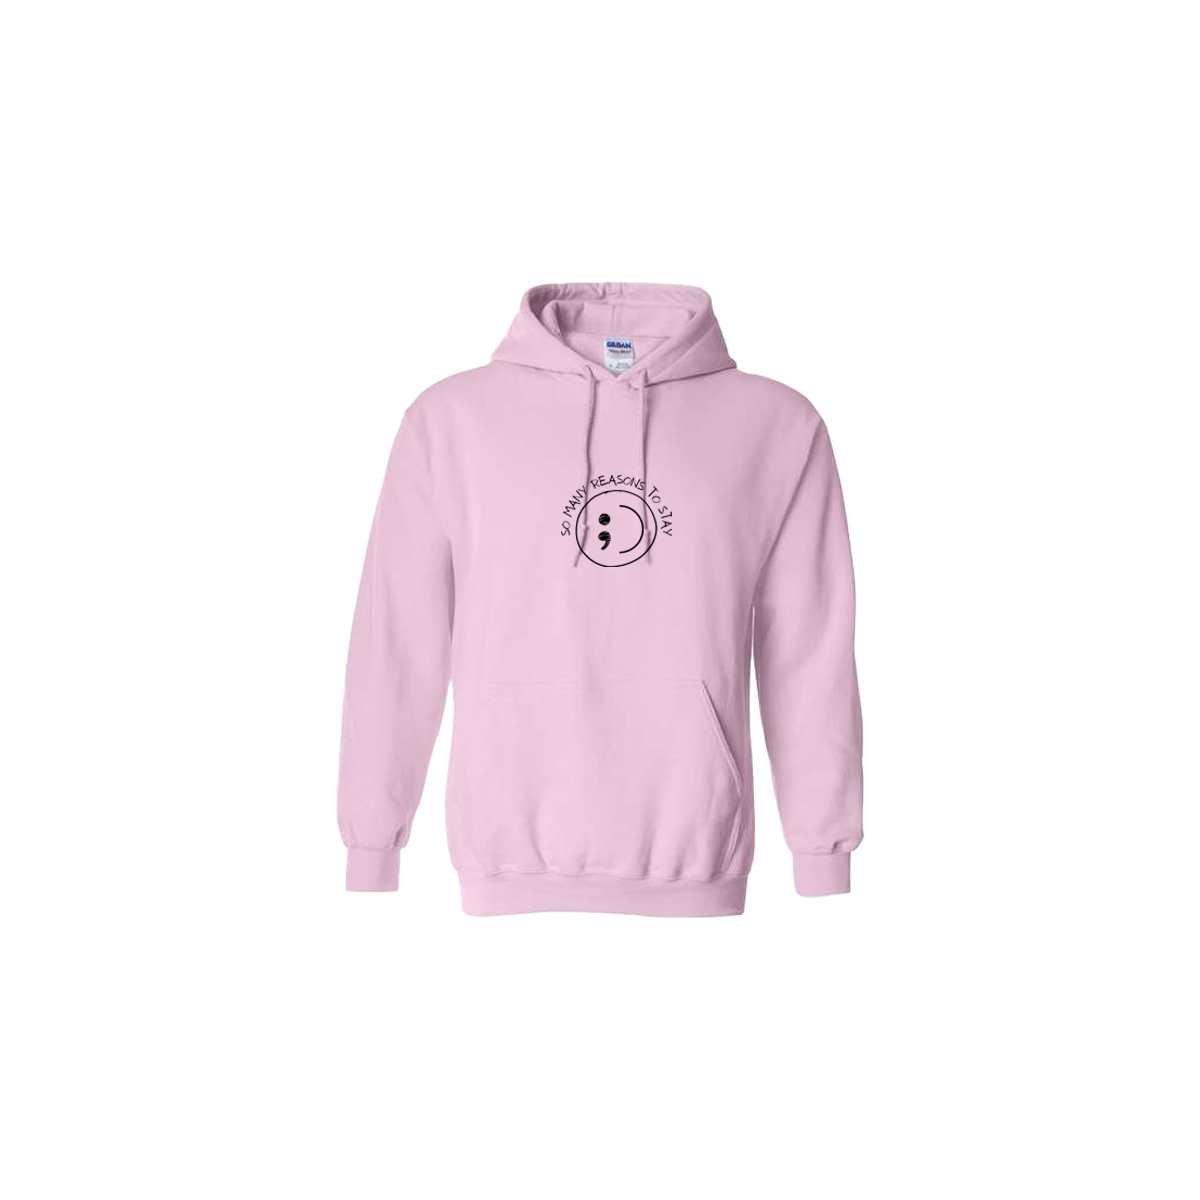 So Many Reasons to Stay Embroidered Light Pink Hoodie - Mental Health Awareness Clothing